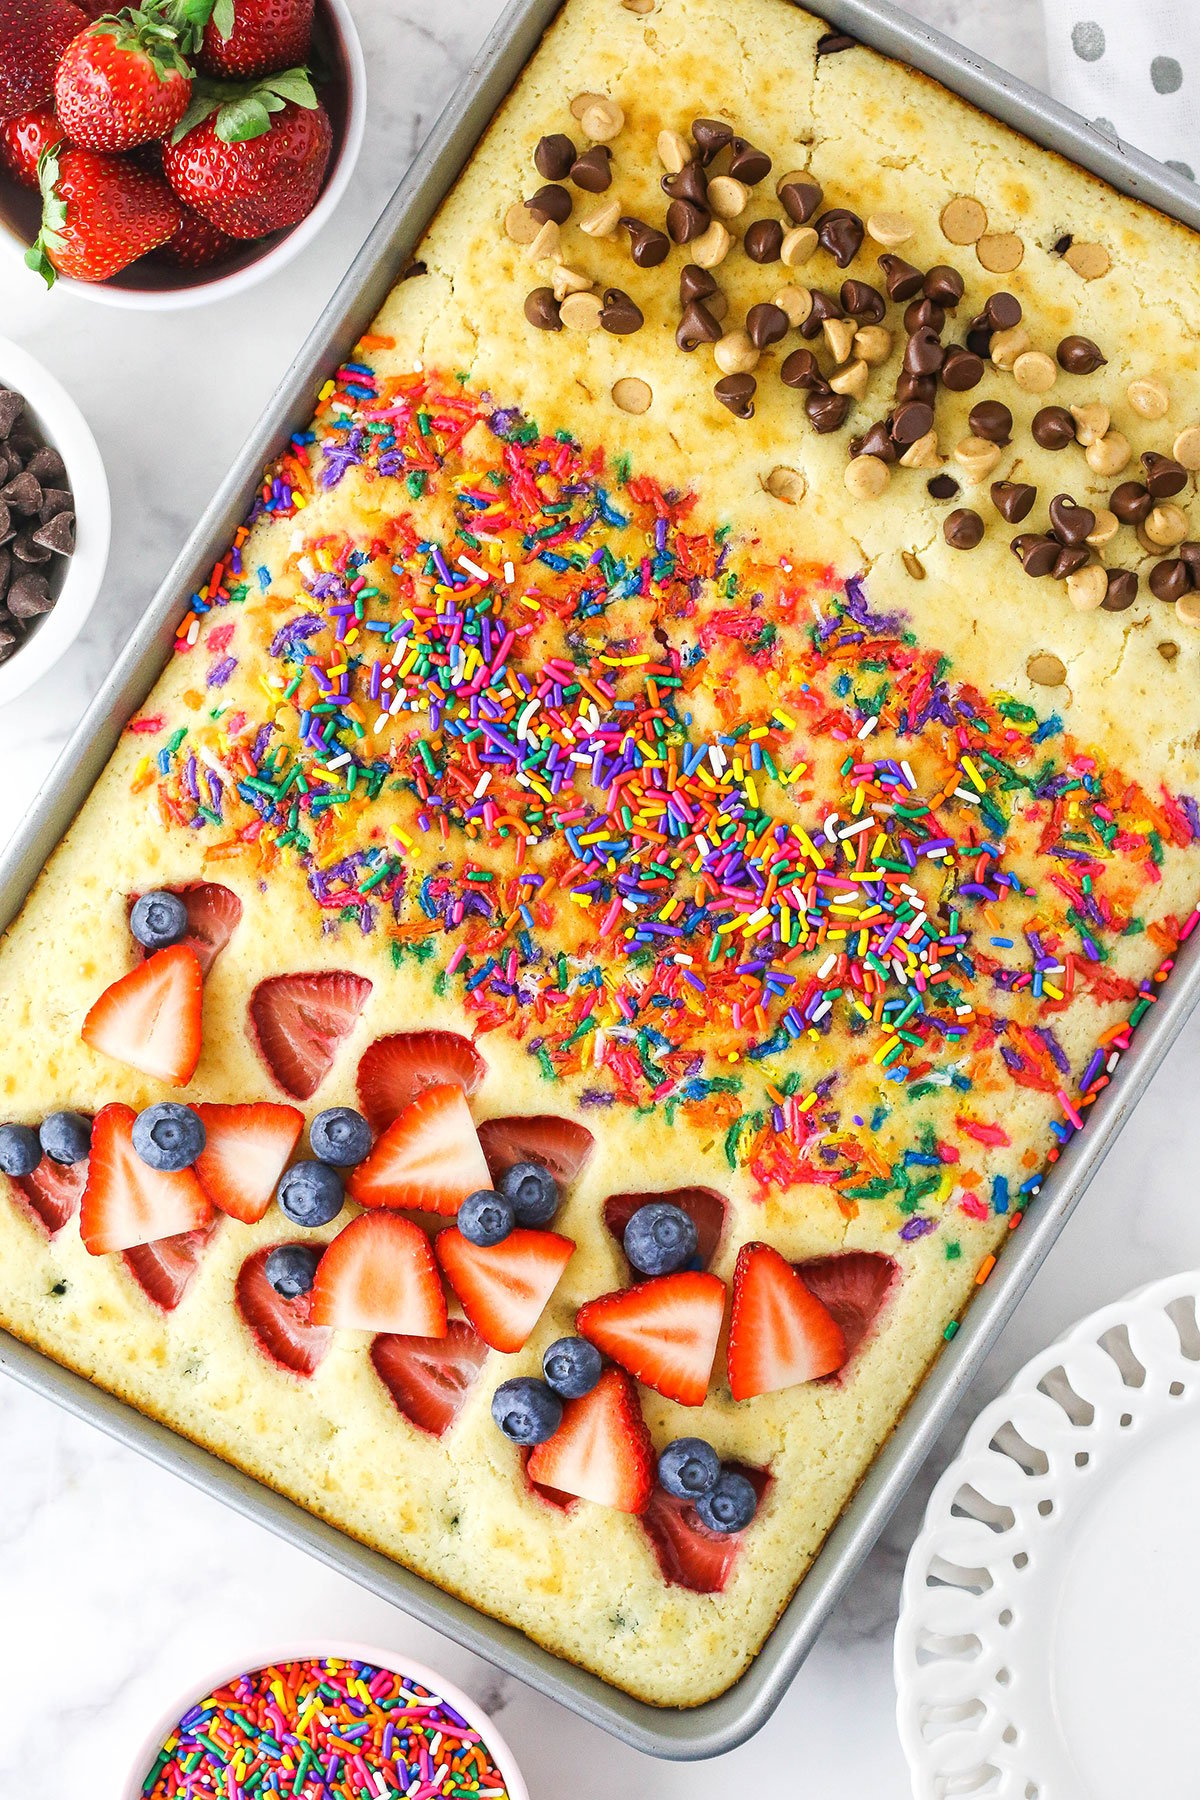 A sheet pan full of cooked pancakes with fruit, sprinkles and chocolate & peanut butter chips on top